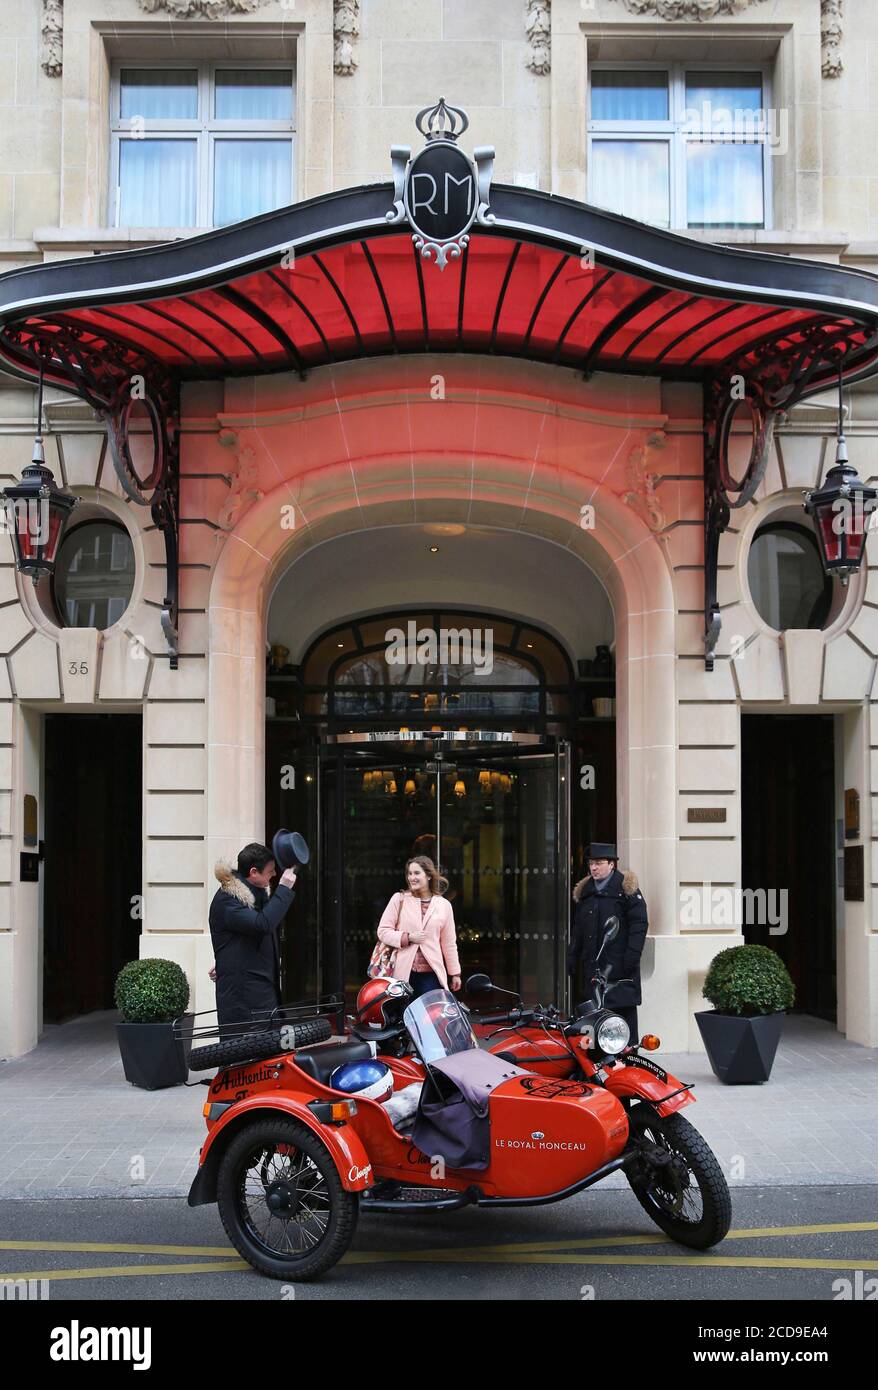 France, Paris, Royal Monceau hotel, woman riding in a retro side car in front of the hotel facade guarded by two valet Stock Photo